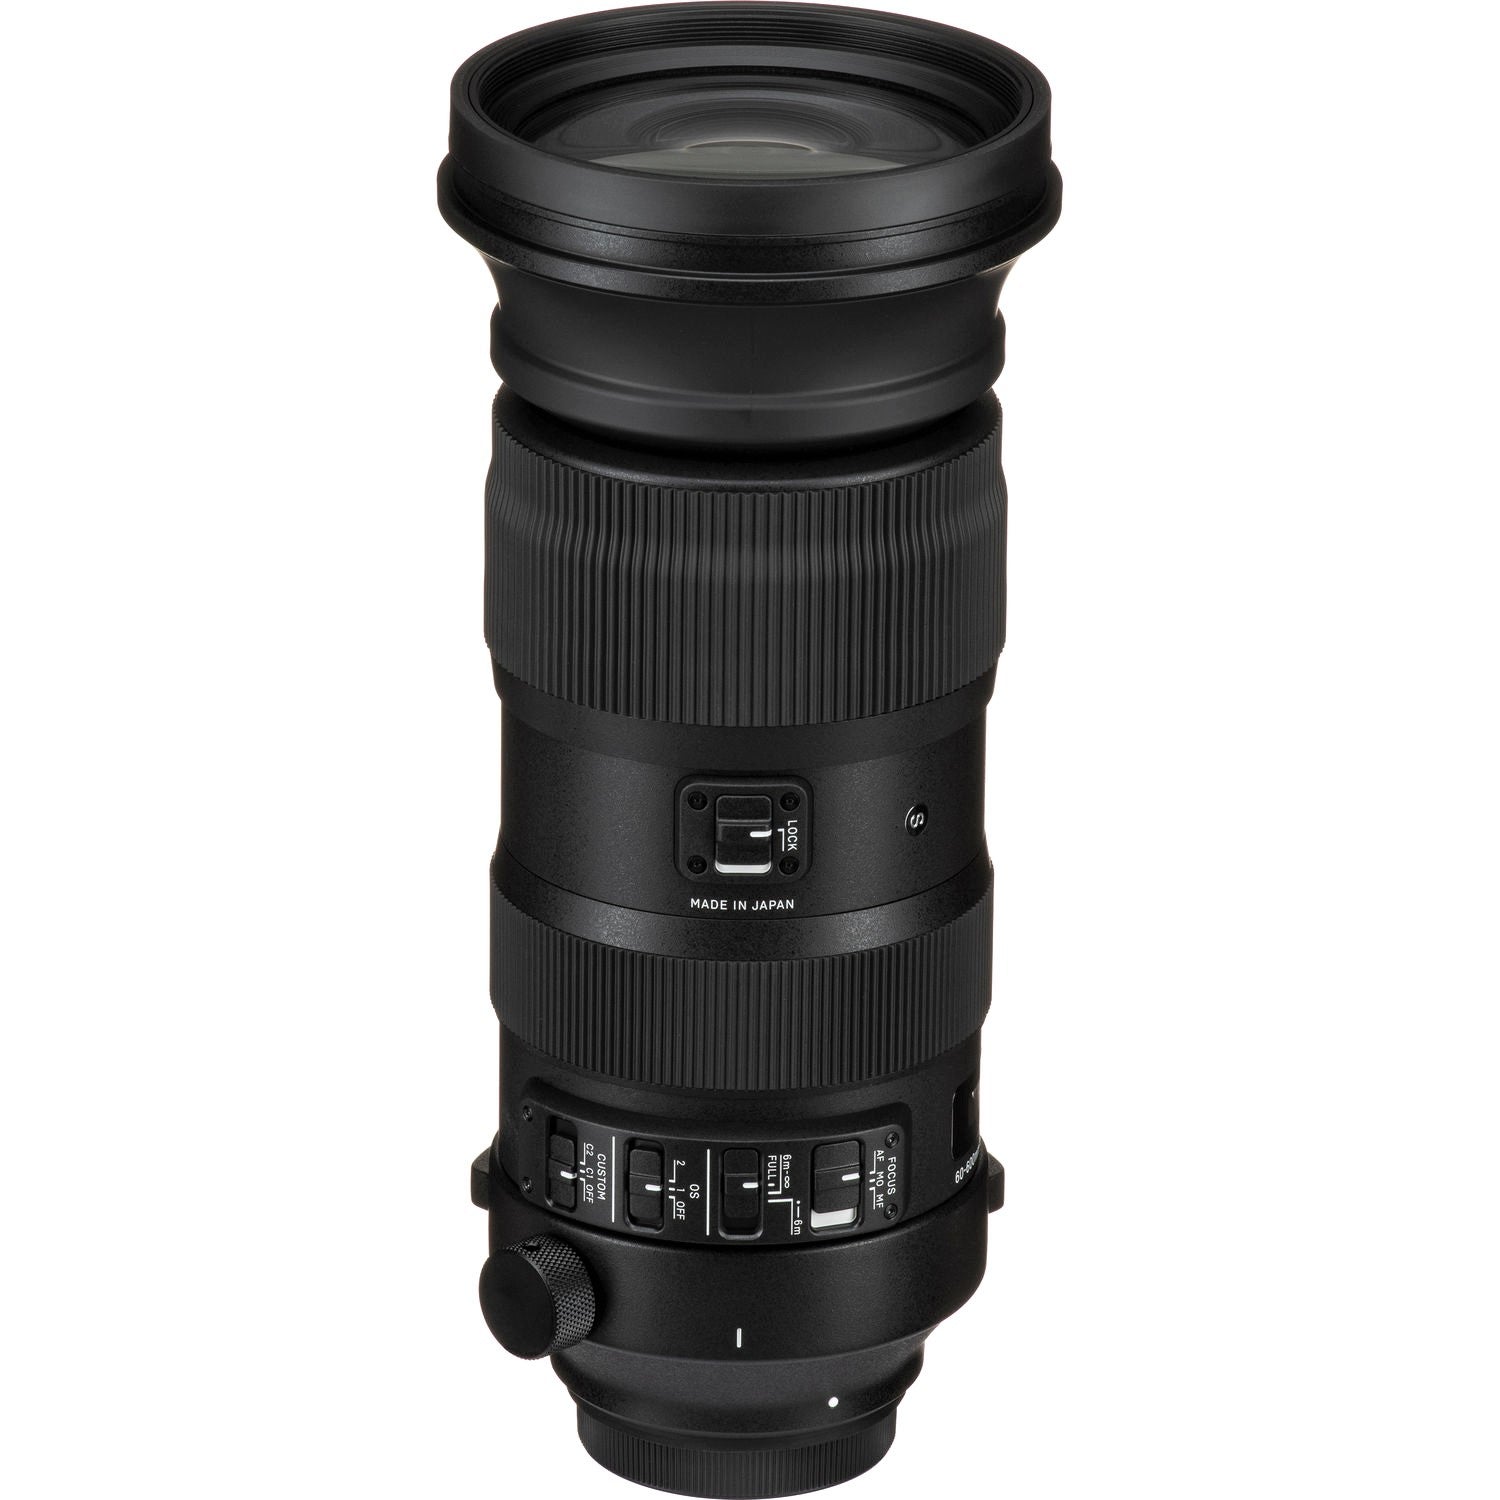 Sigma 60-600mm F4.5-6.3 DG OS HSM Sports Lens for Canon EF